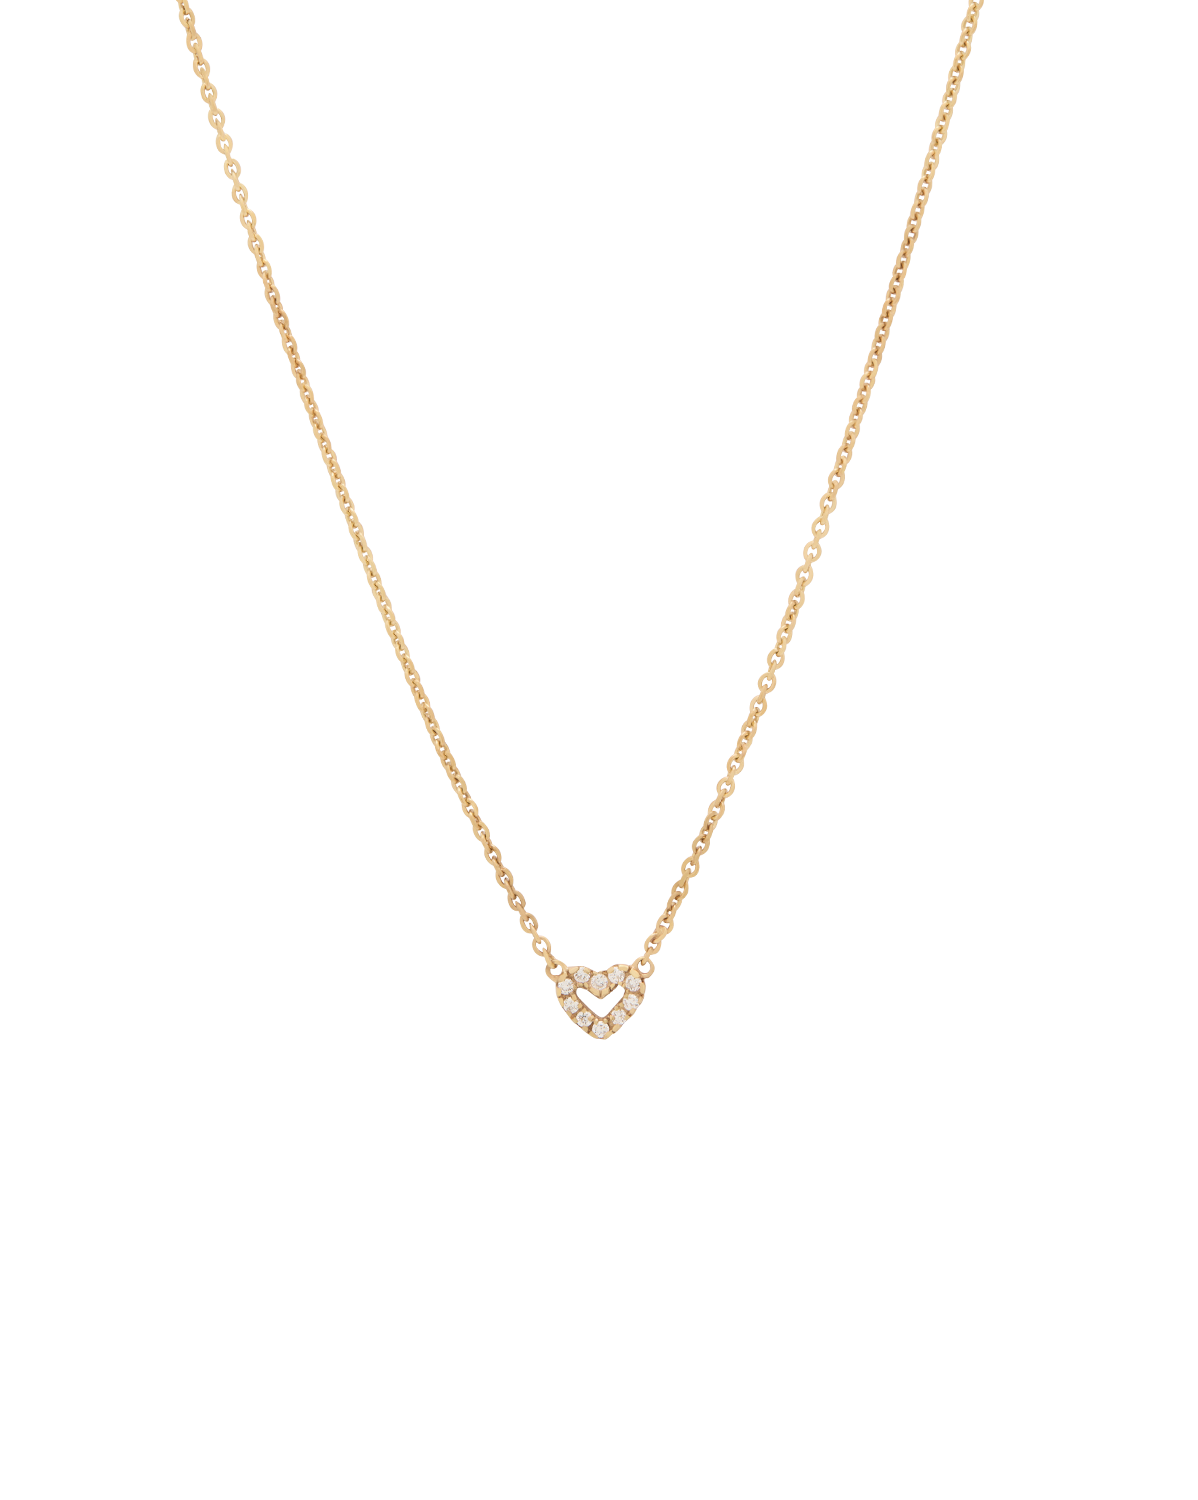 Solid Gold Diamond Heart Necklace